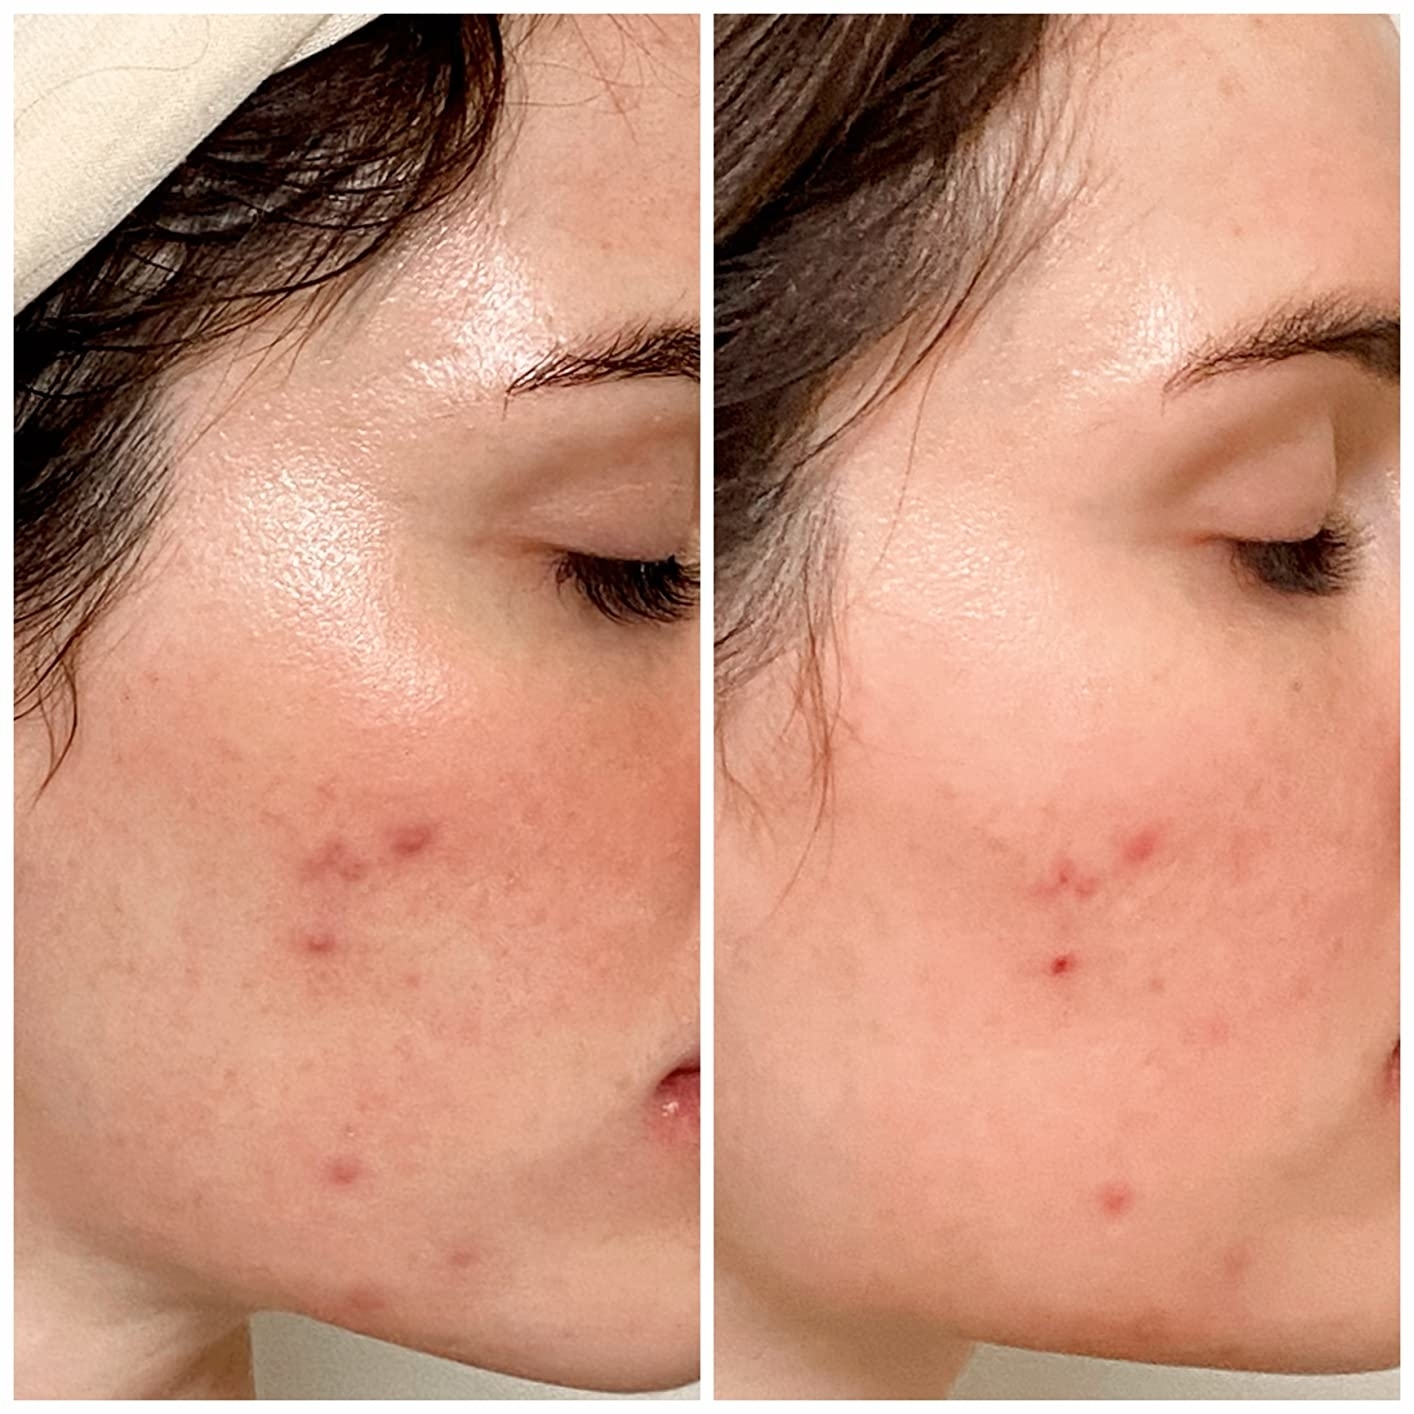 two reviewer photo 12 hours apart showing the oil helped reduce redness and helped heal breakouts overnight